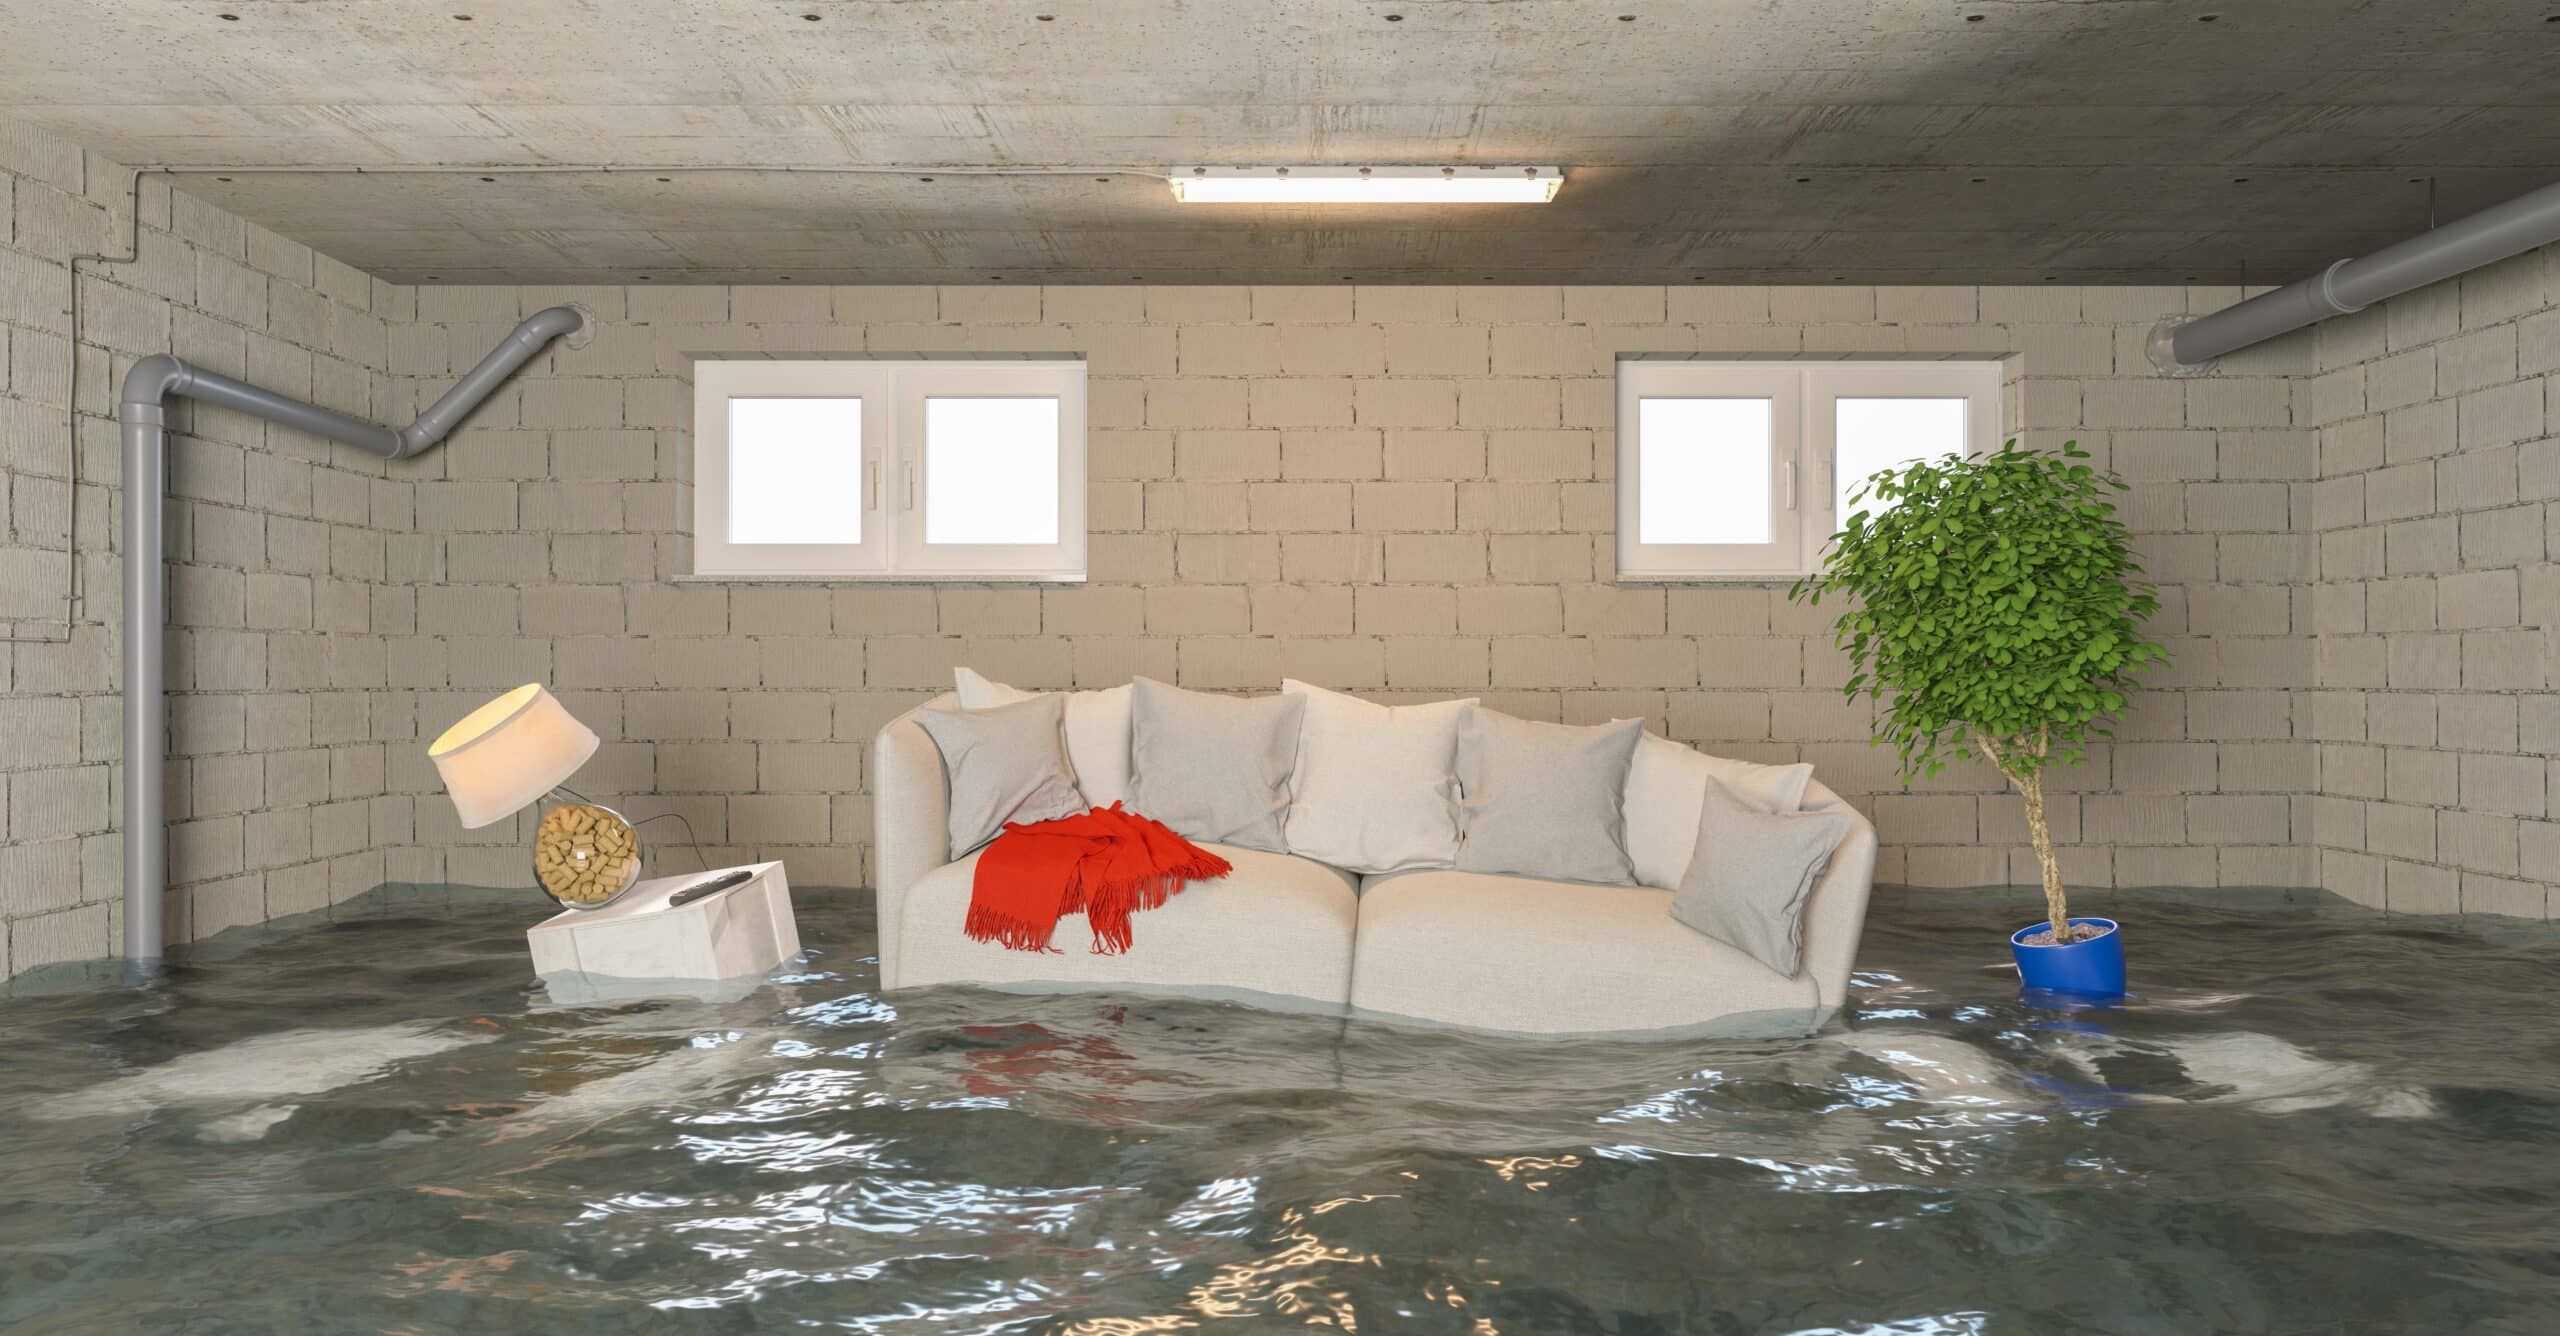 Step-by-Step Water Damage Restoration Guide